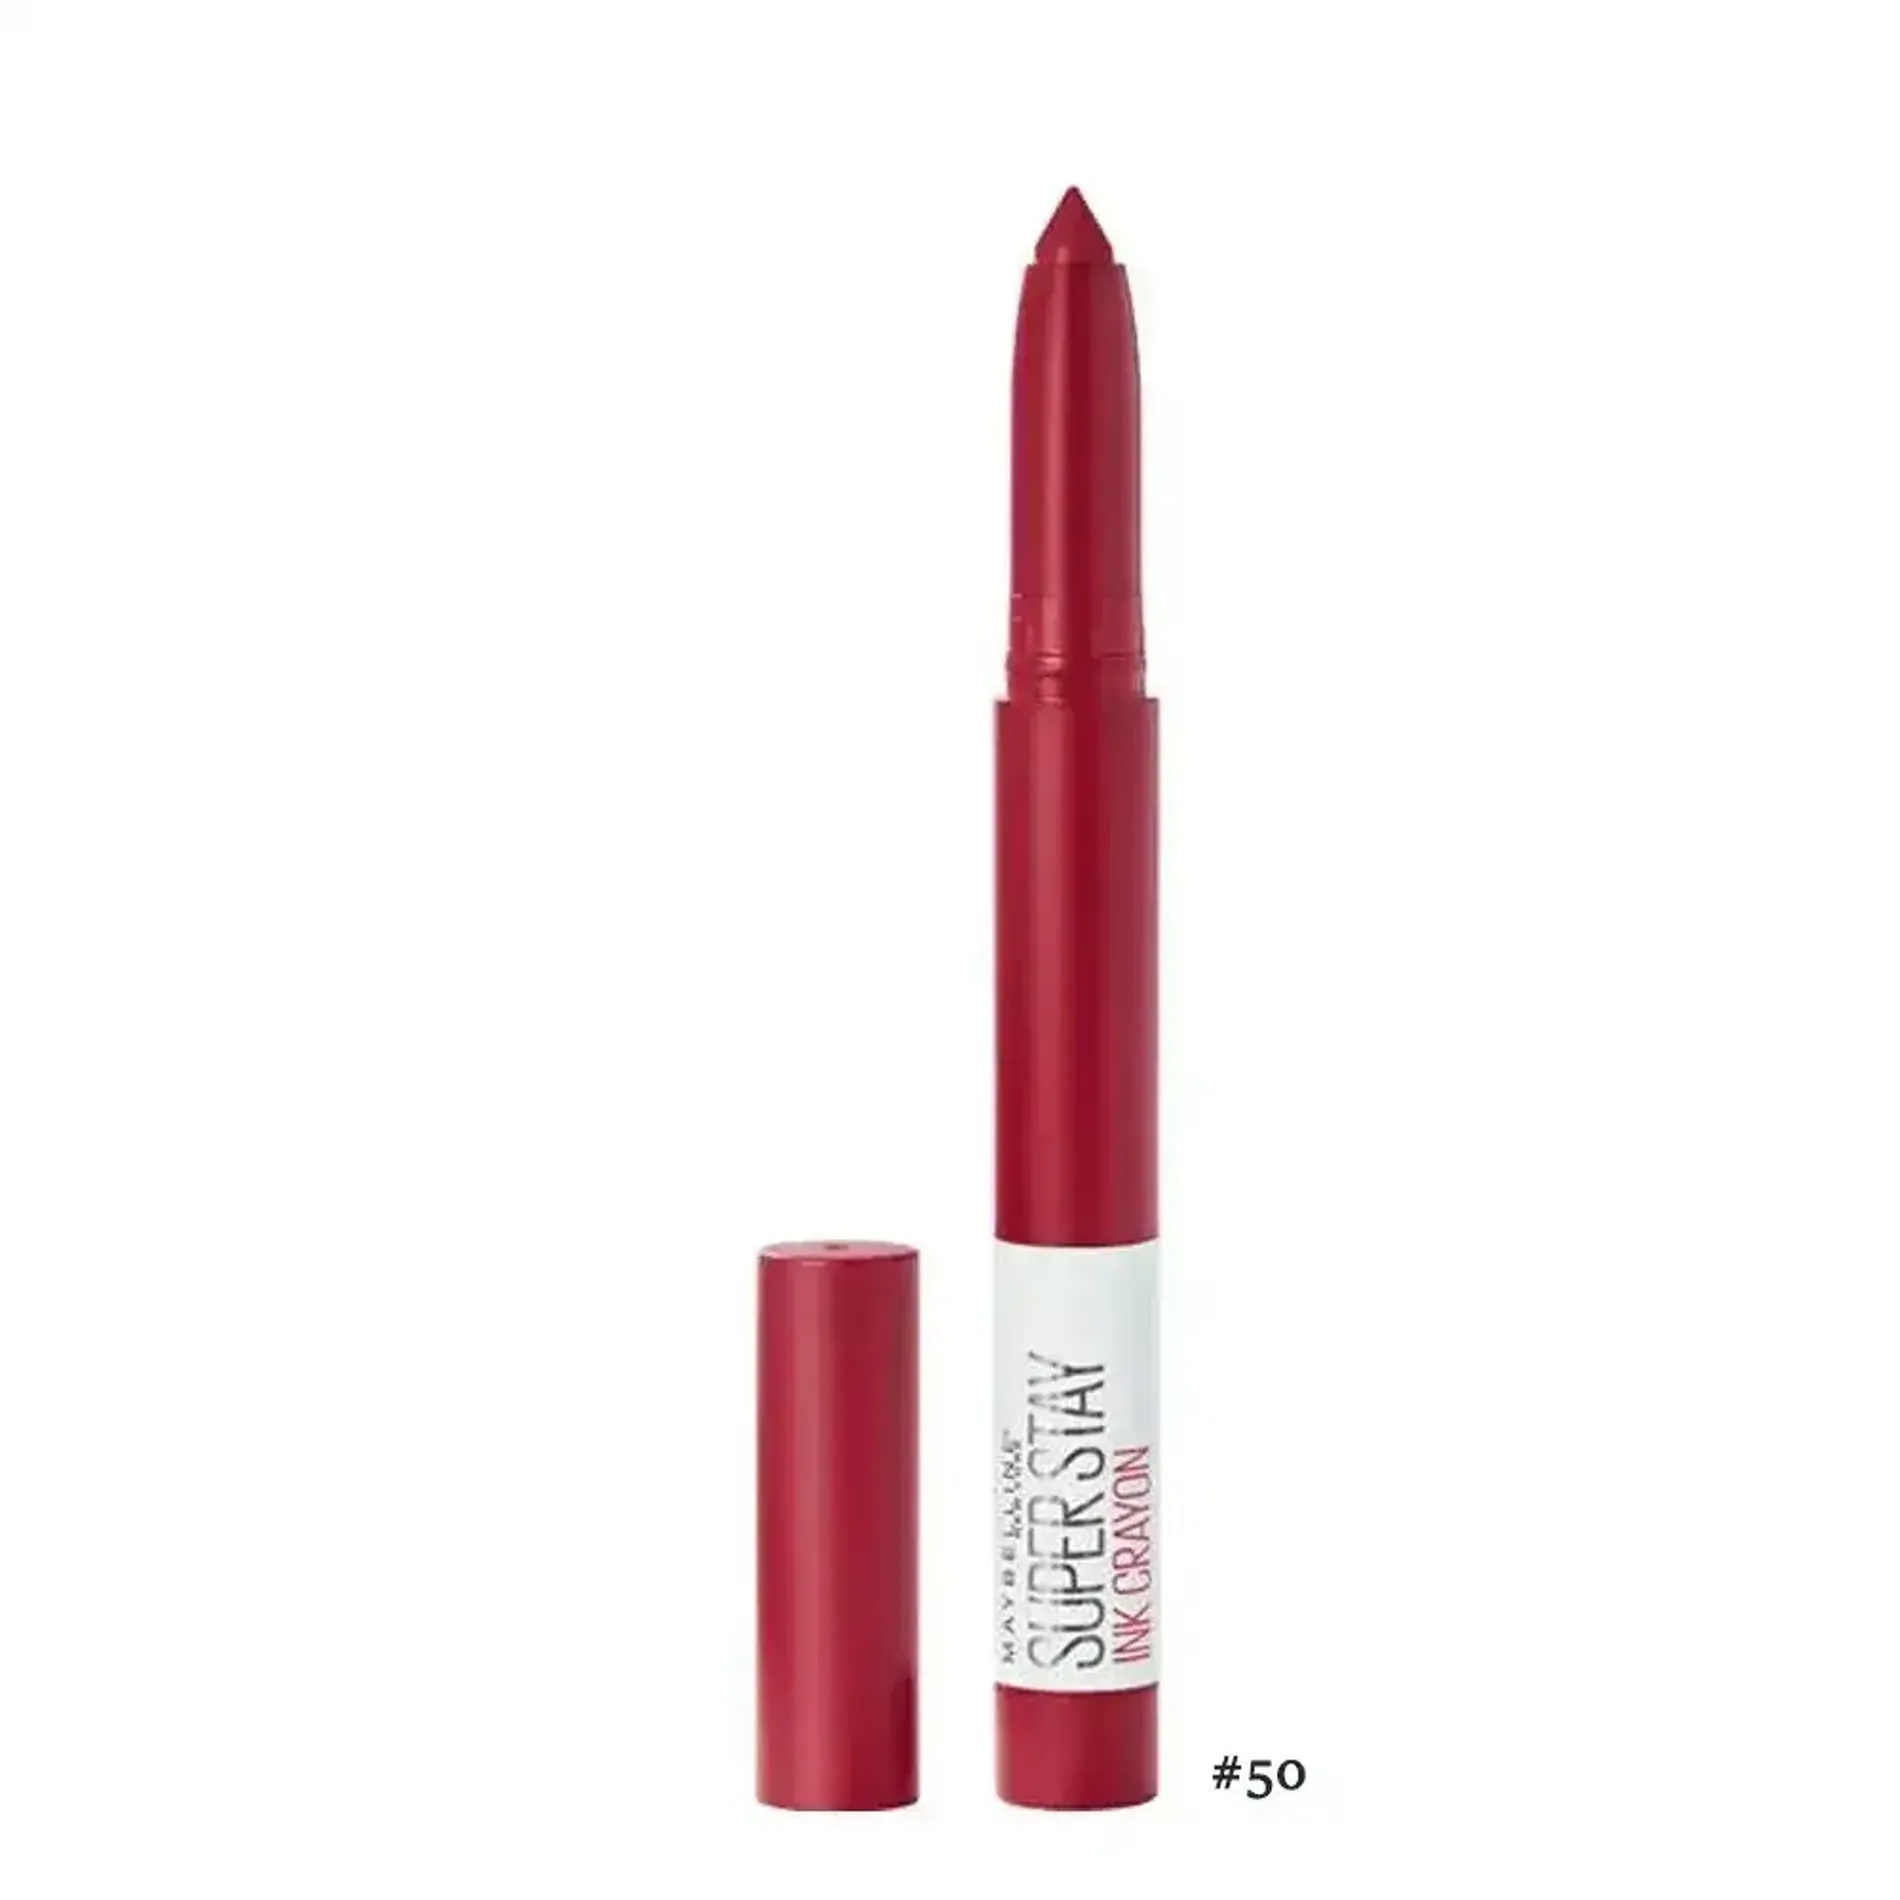 son-but-chi-lau-troi-maybelline-superstay-ink-crayon-3-9g-2